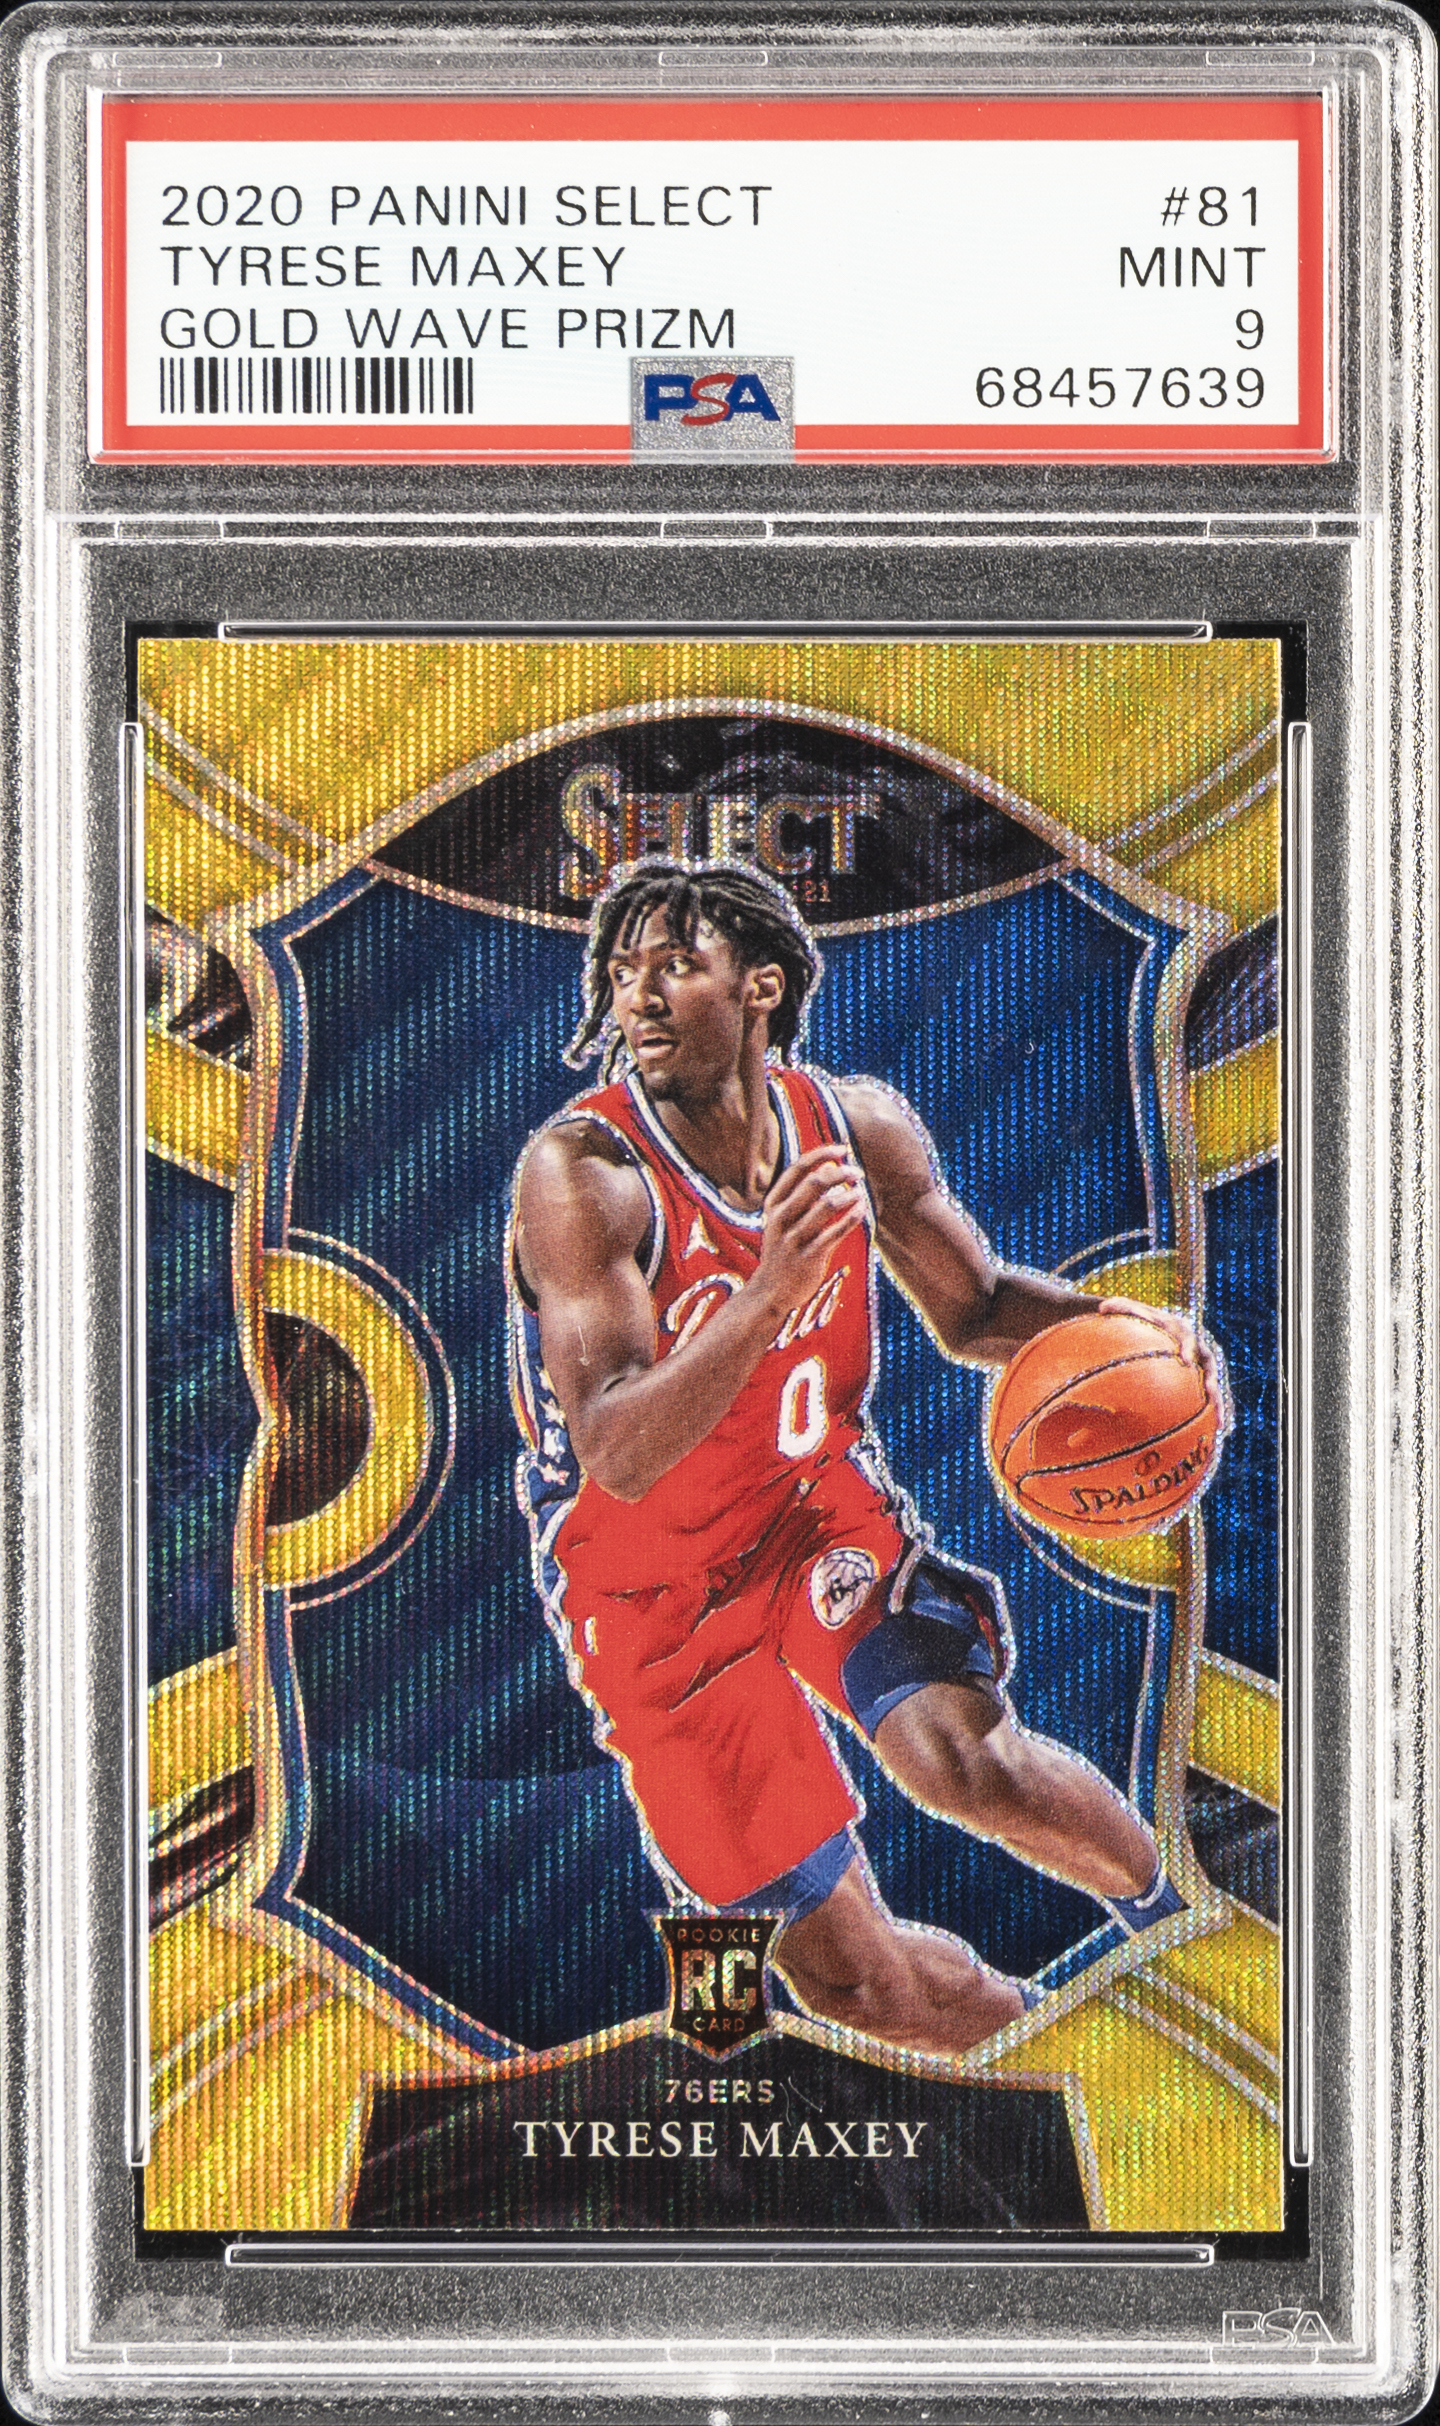 2020 Panini Select Gold Wave Prizm 81 Tyrese Maxey Rookie Card – PSA MINT 9